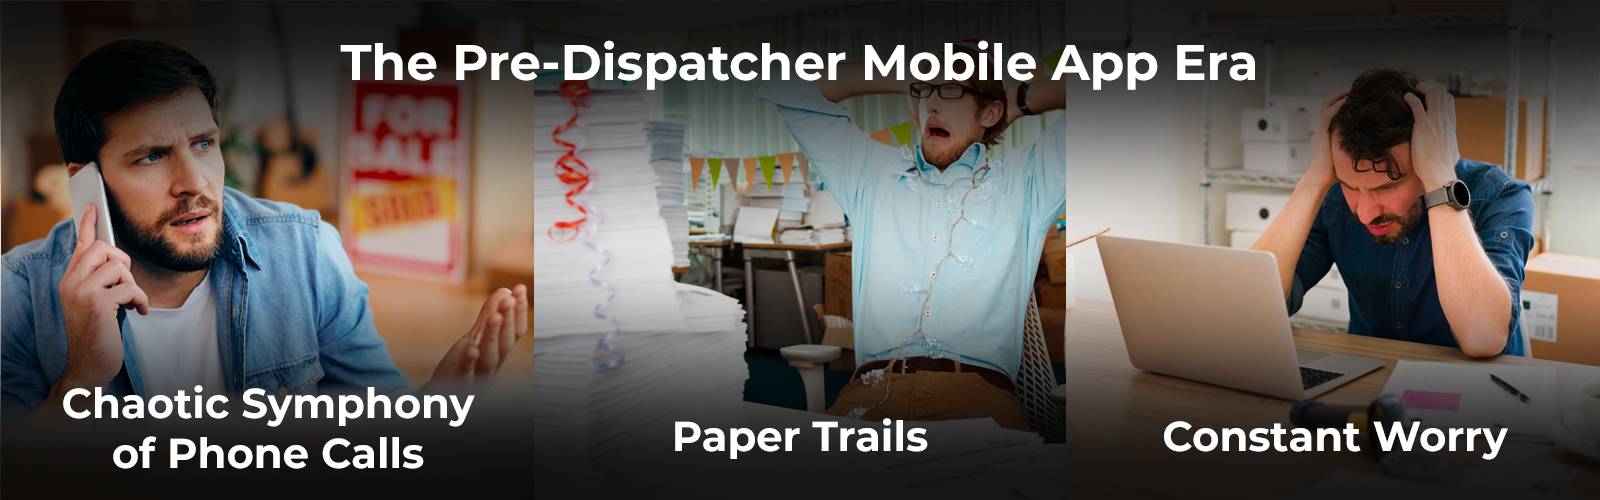 Life of a dispatcher without Dispatcher Mobile App